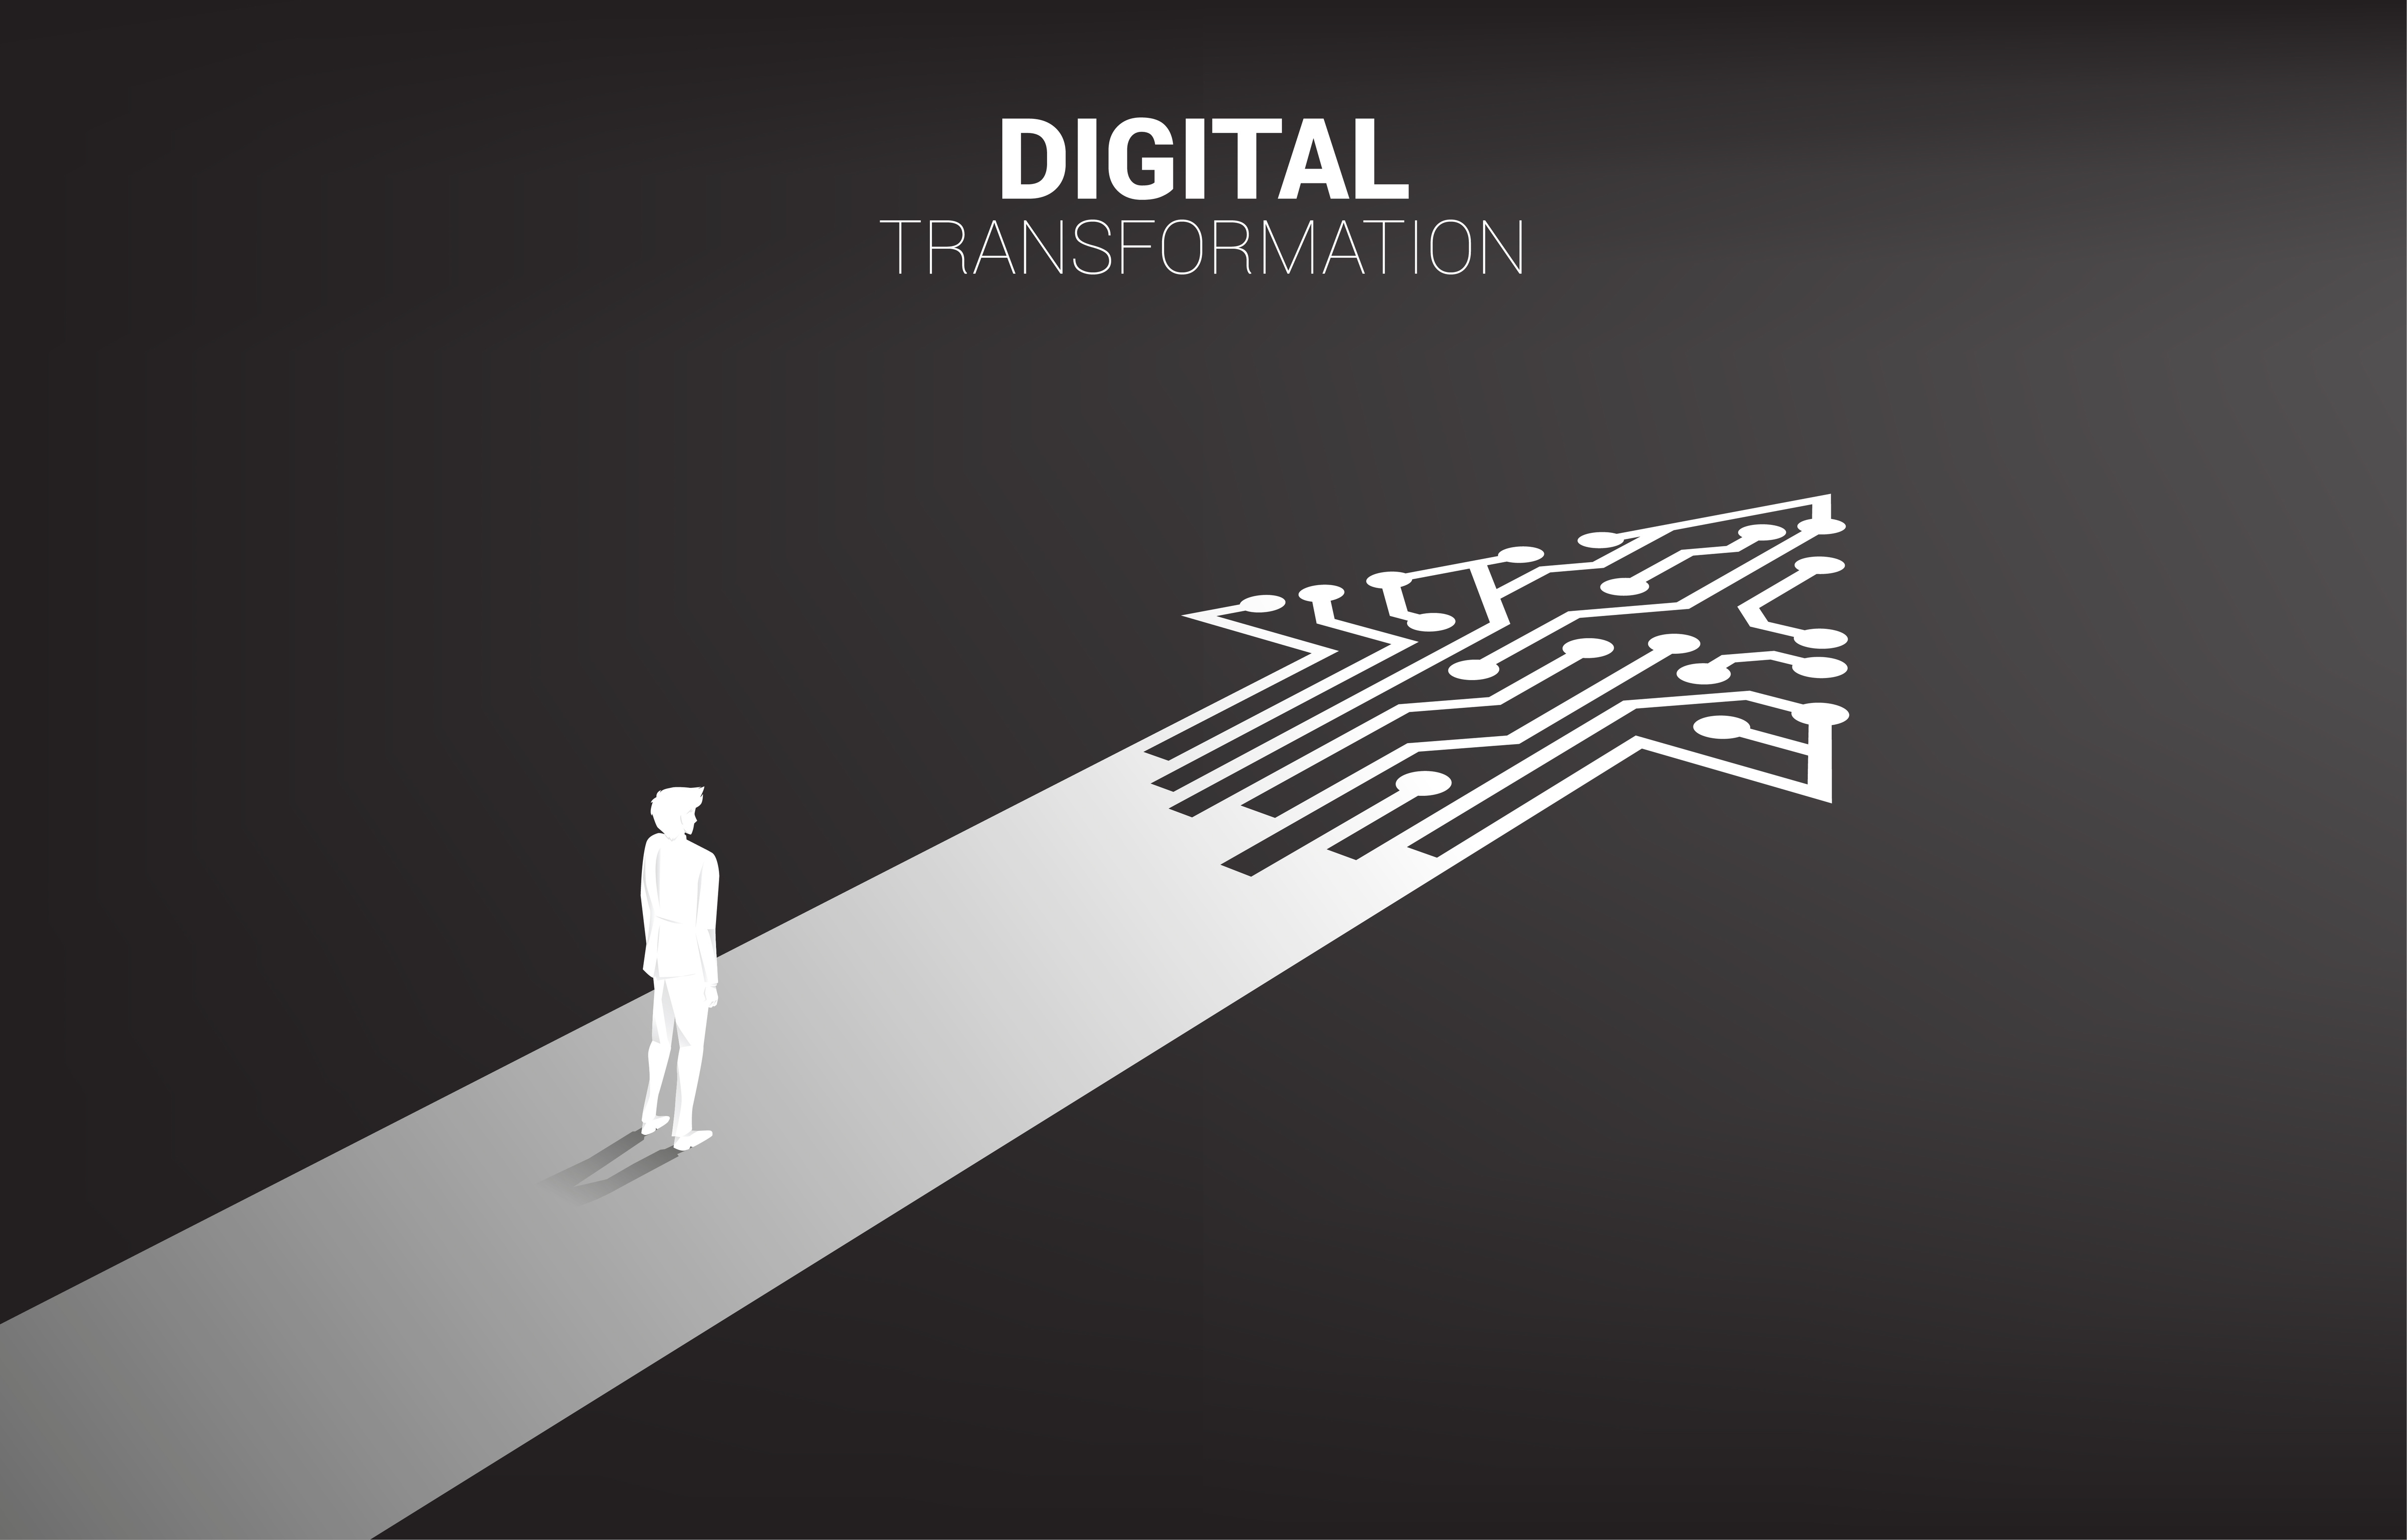 A quick guide to overcoming digital transformation challenges